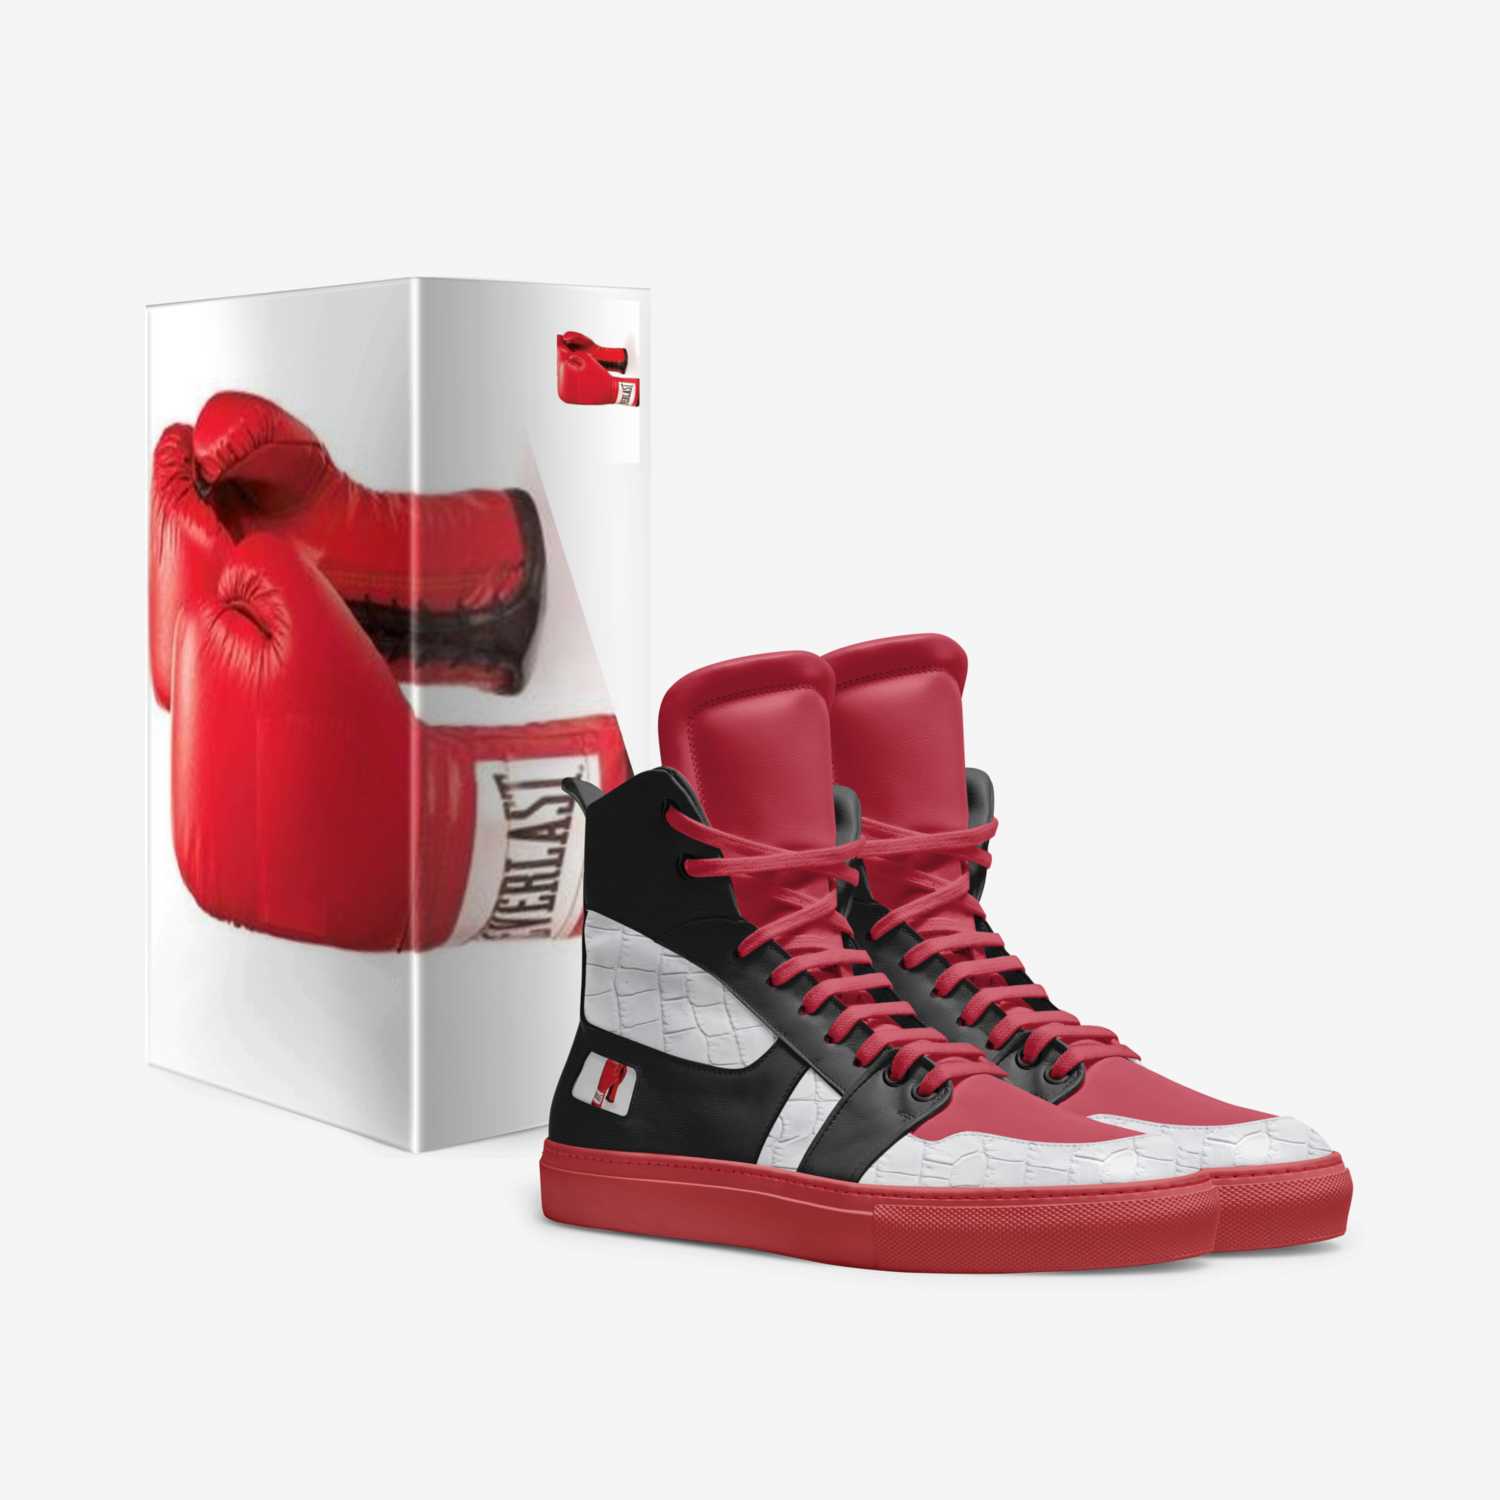 THE LEGEND OF ALI custom made in Italy shoes by Cedric Harris | Box view